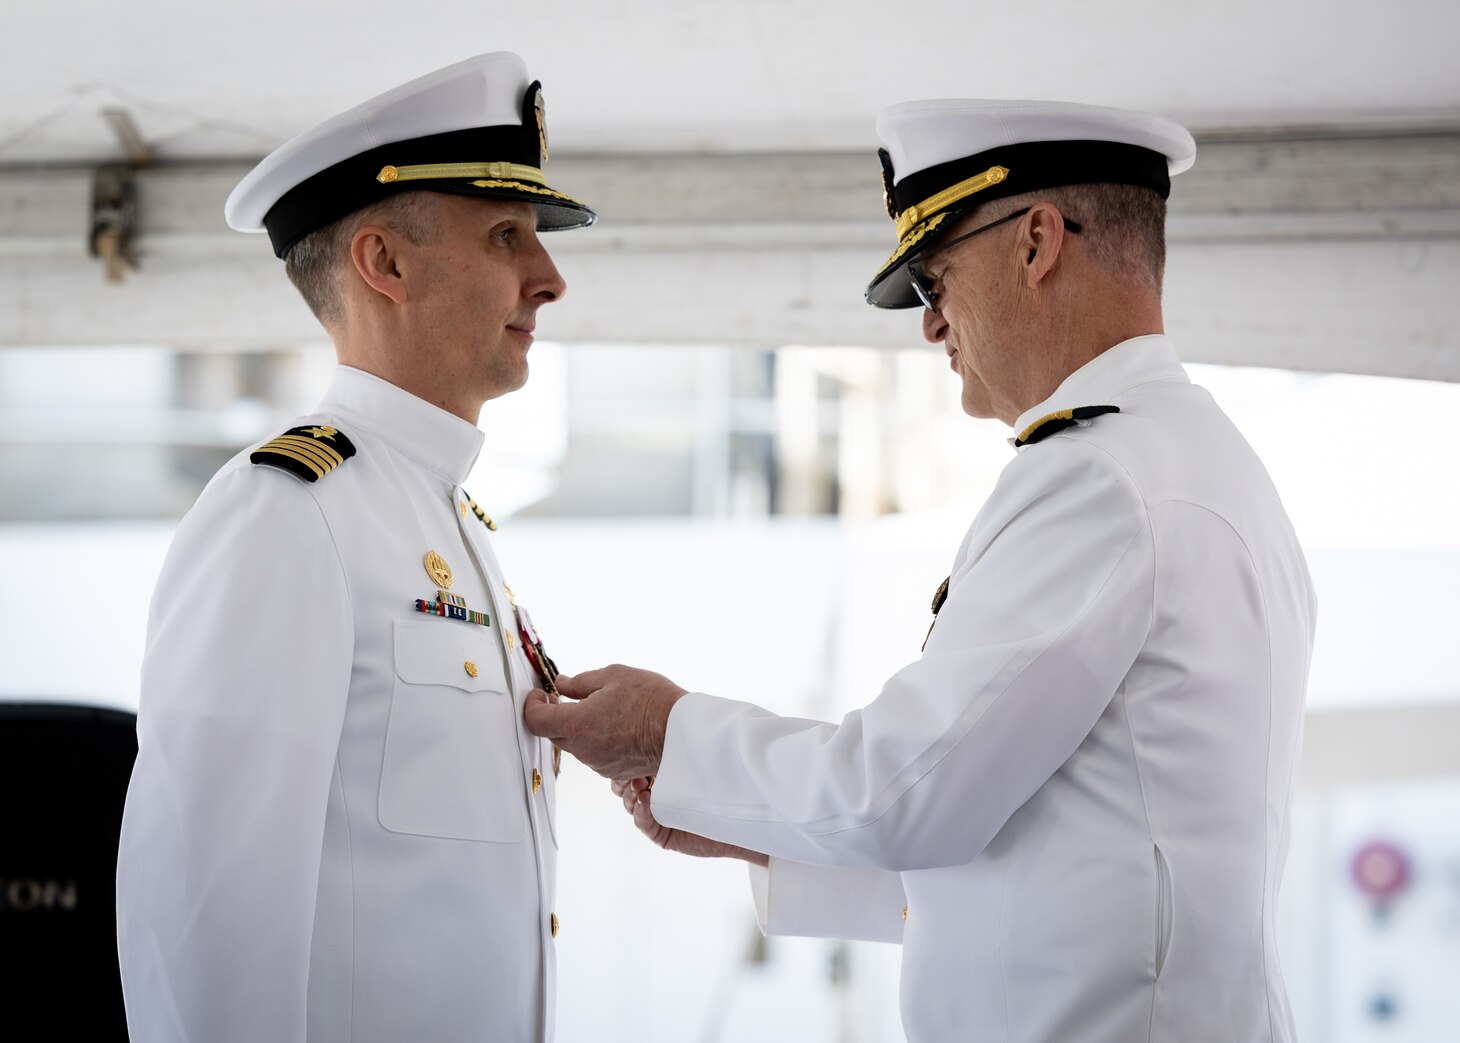 Military Sealift Command’s leadership in the Atlantic changed hands, when Navy Capt. James A. Murdock relieved Navy Capt. Daniel E. Broadhurst as commander of Norfolk-based Military Sealift Command Atlantic (MSC Atlantic) during a change of command ceremony held aboard Navy hospital ship USNS Comfort (T-AH-20) in Naval Station Norfolk April 13, 2023. In this picture, Rear Adm. Michael A. Wettlaufer, commander of MSC, presents Broadhurst with the Legion of Merit pin.